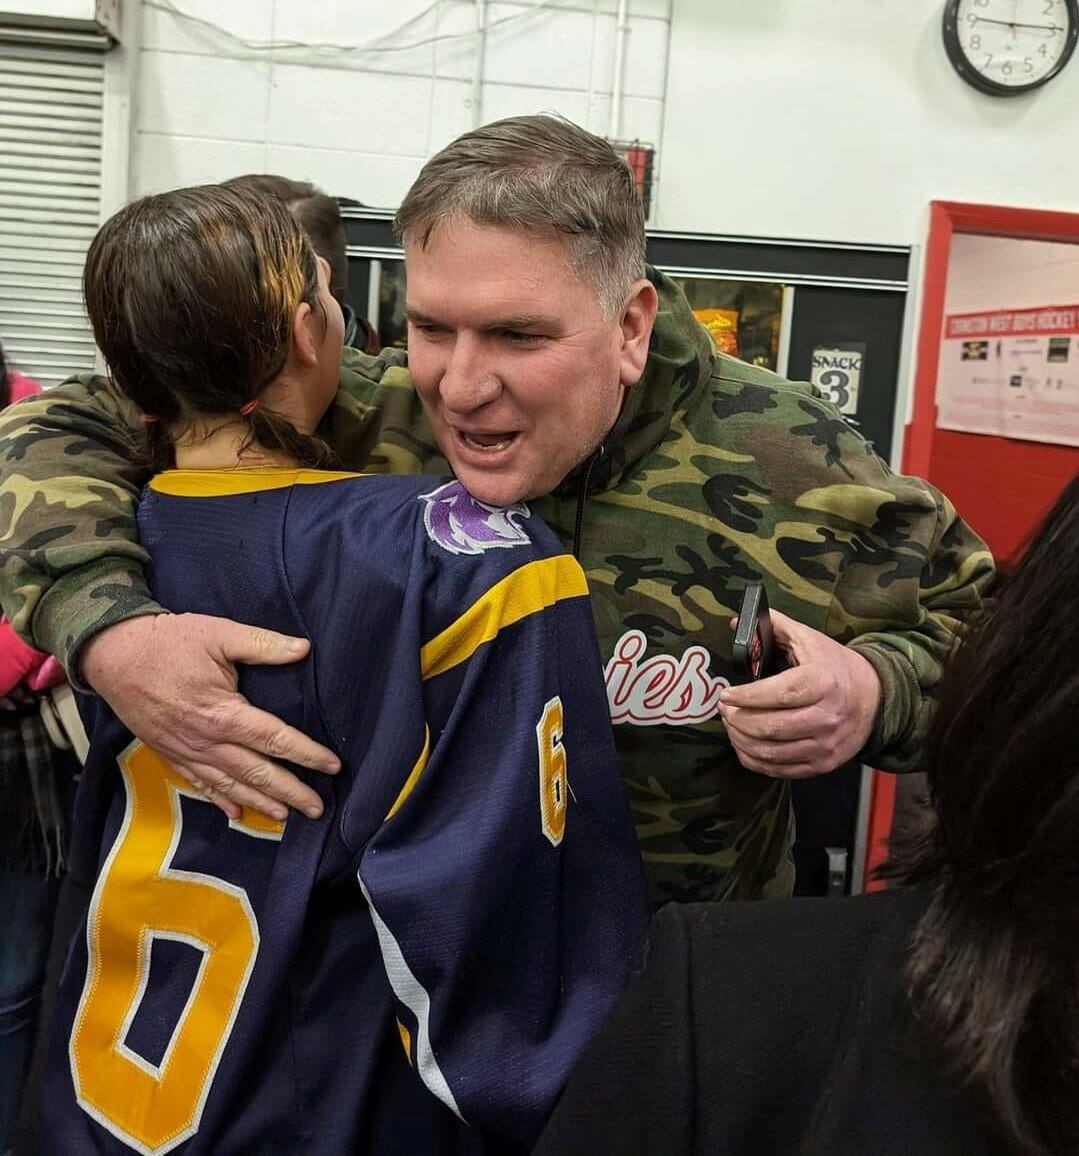 EPHS Principal Bill Black was on hand to see Sydney Olson's hockey hat trick in the win at Cranston's ice rink on January 27th